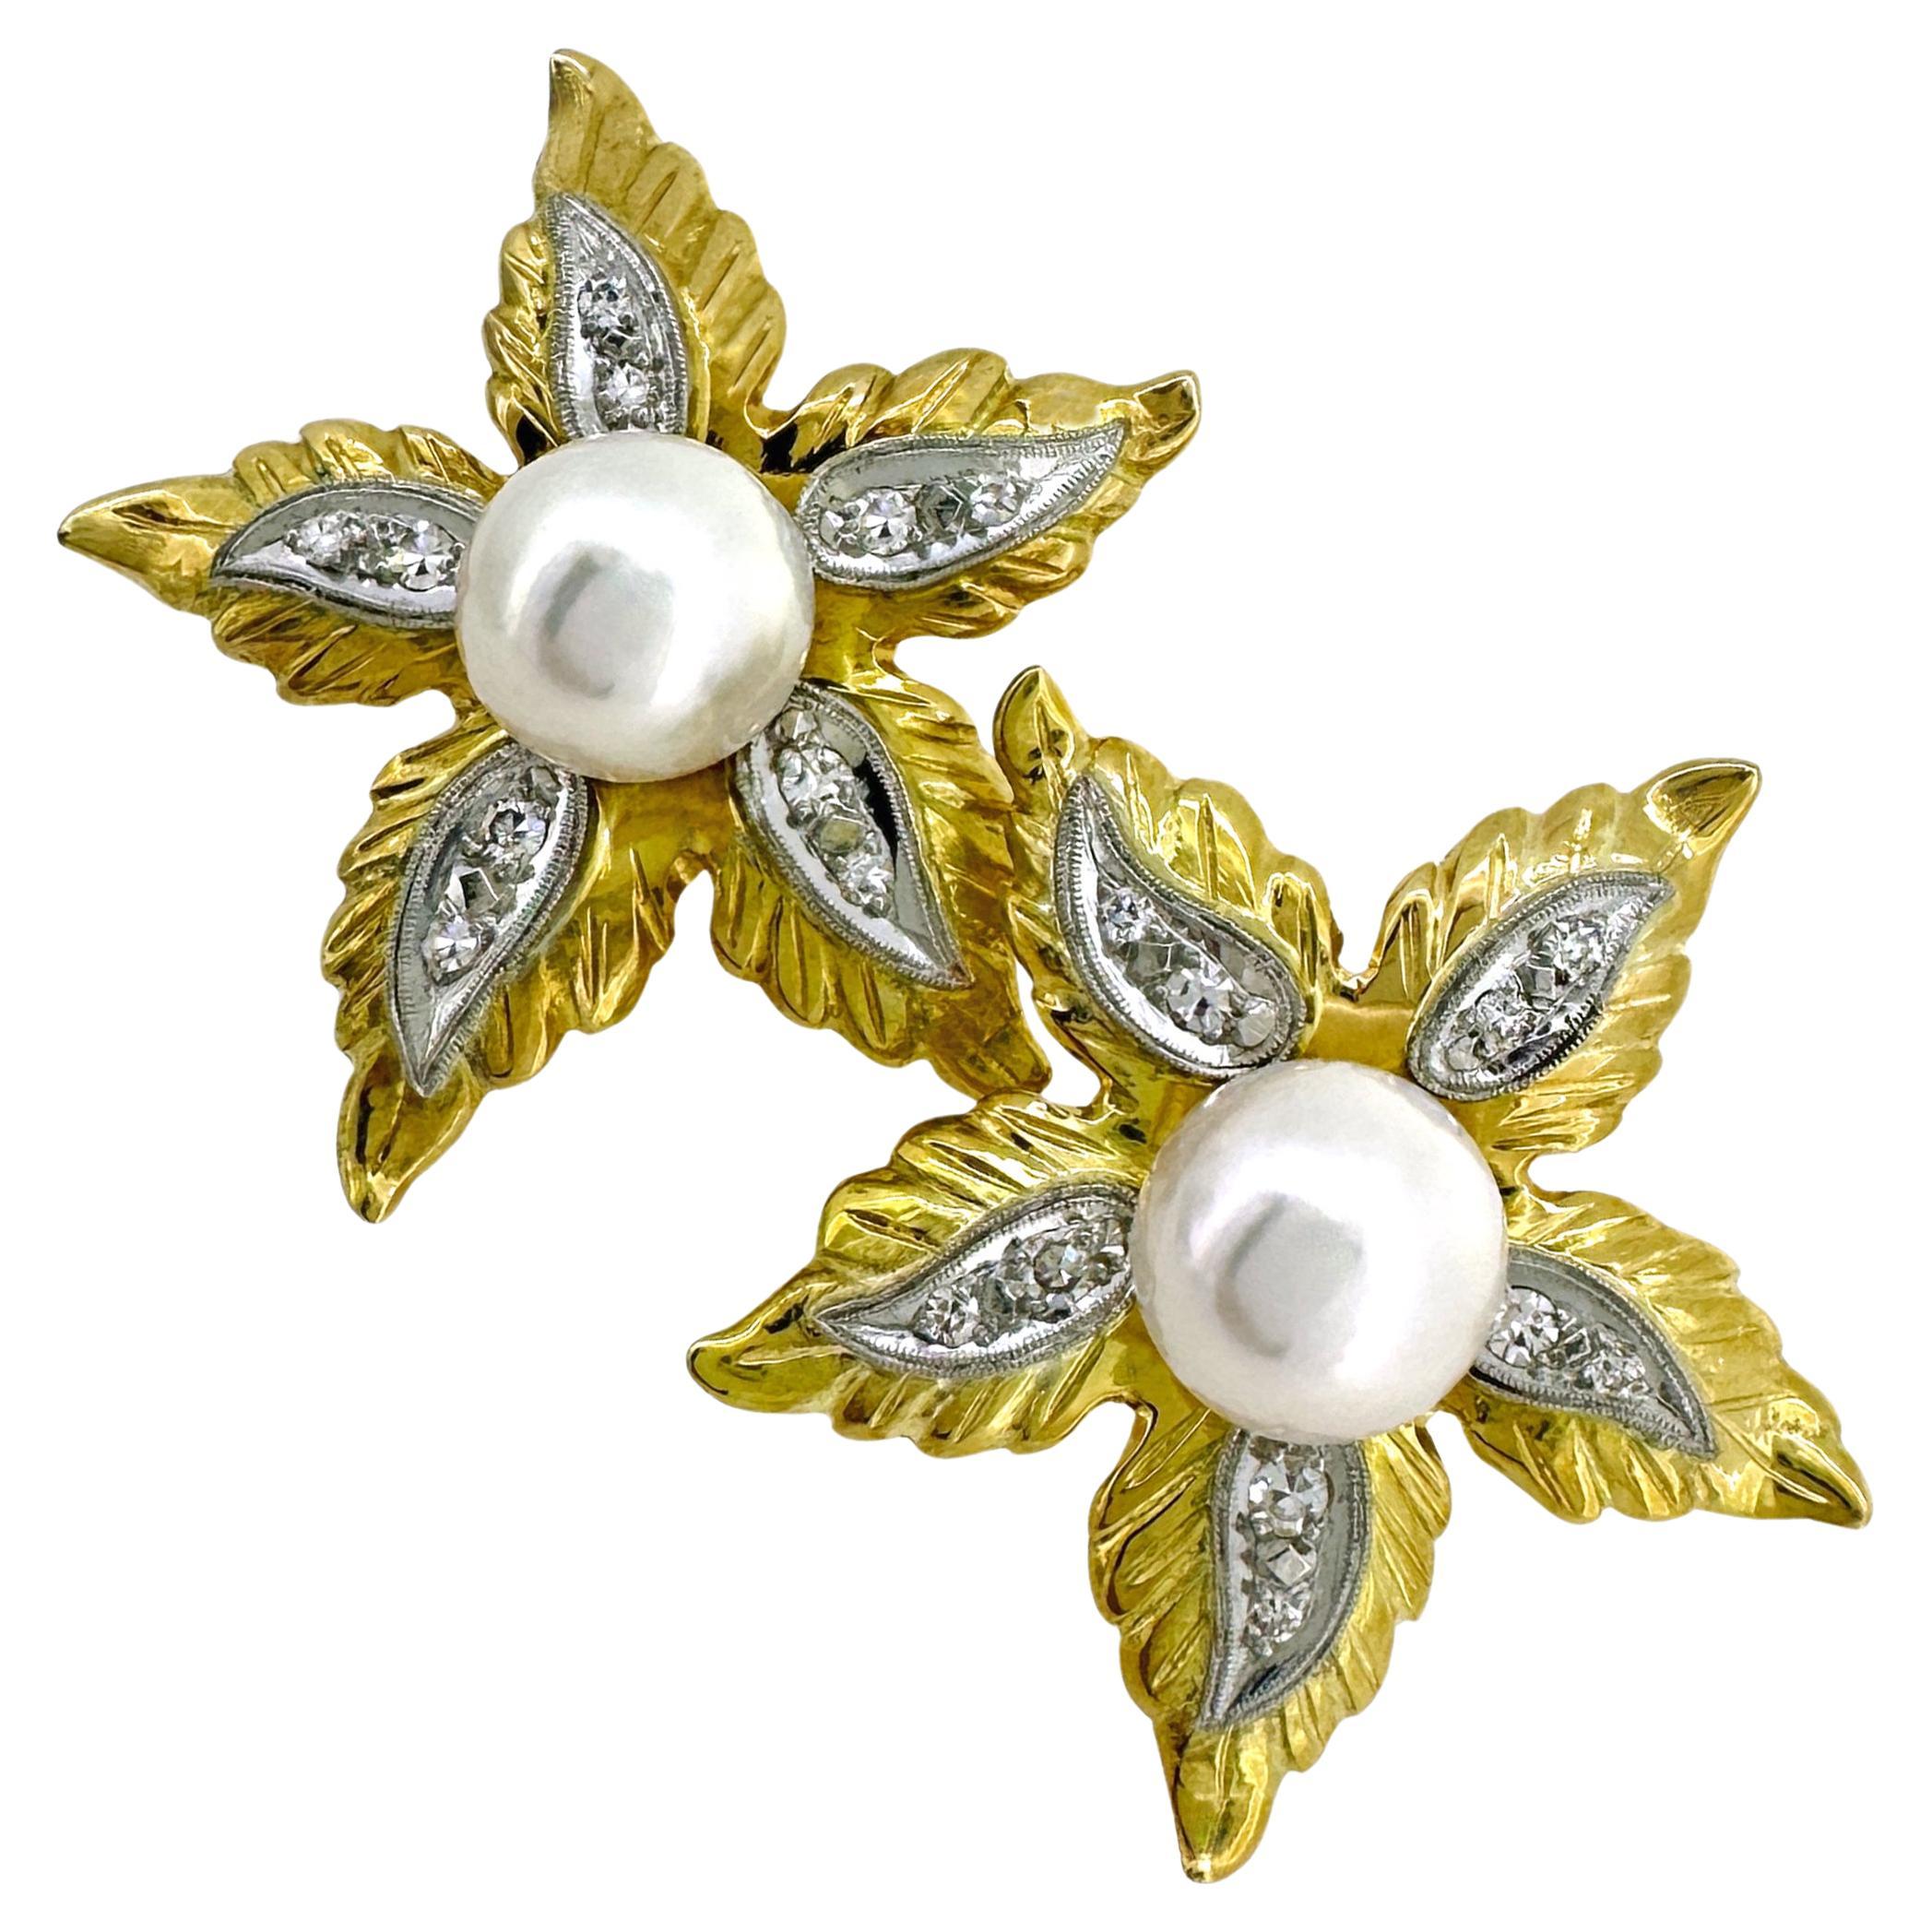 8.5mm Akoya Pearls in Large Flower Earrings of 18K Gold & Platinum with Diamonds For Sale